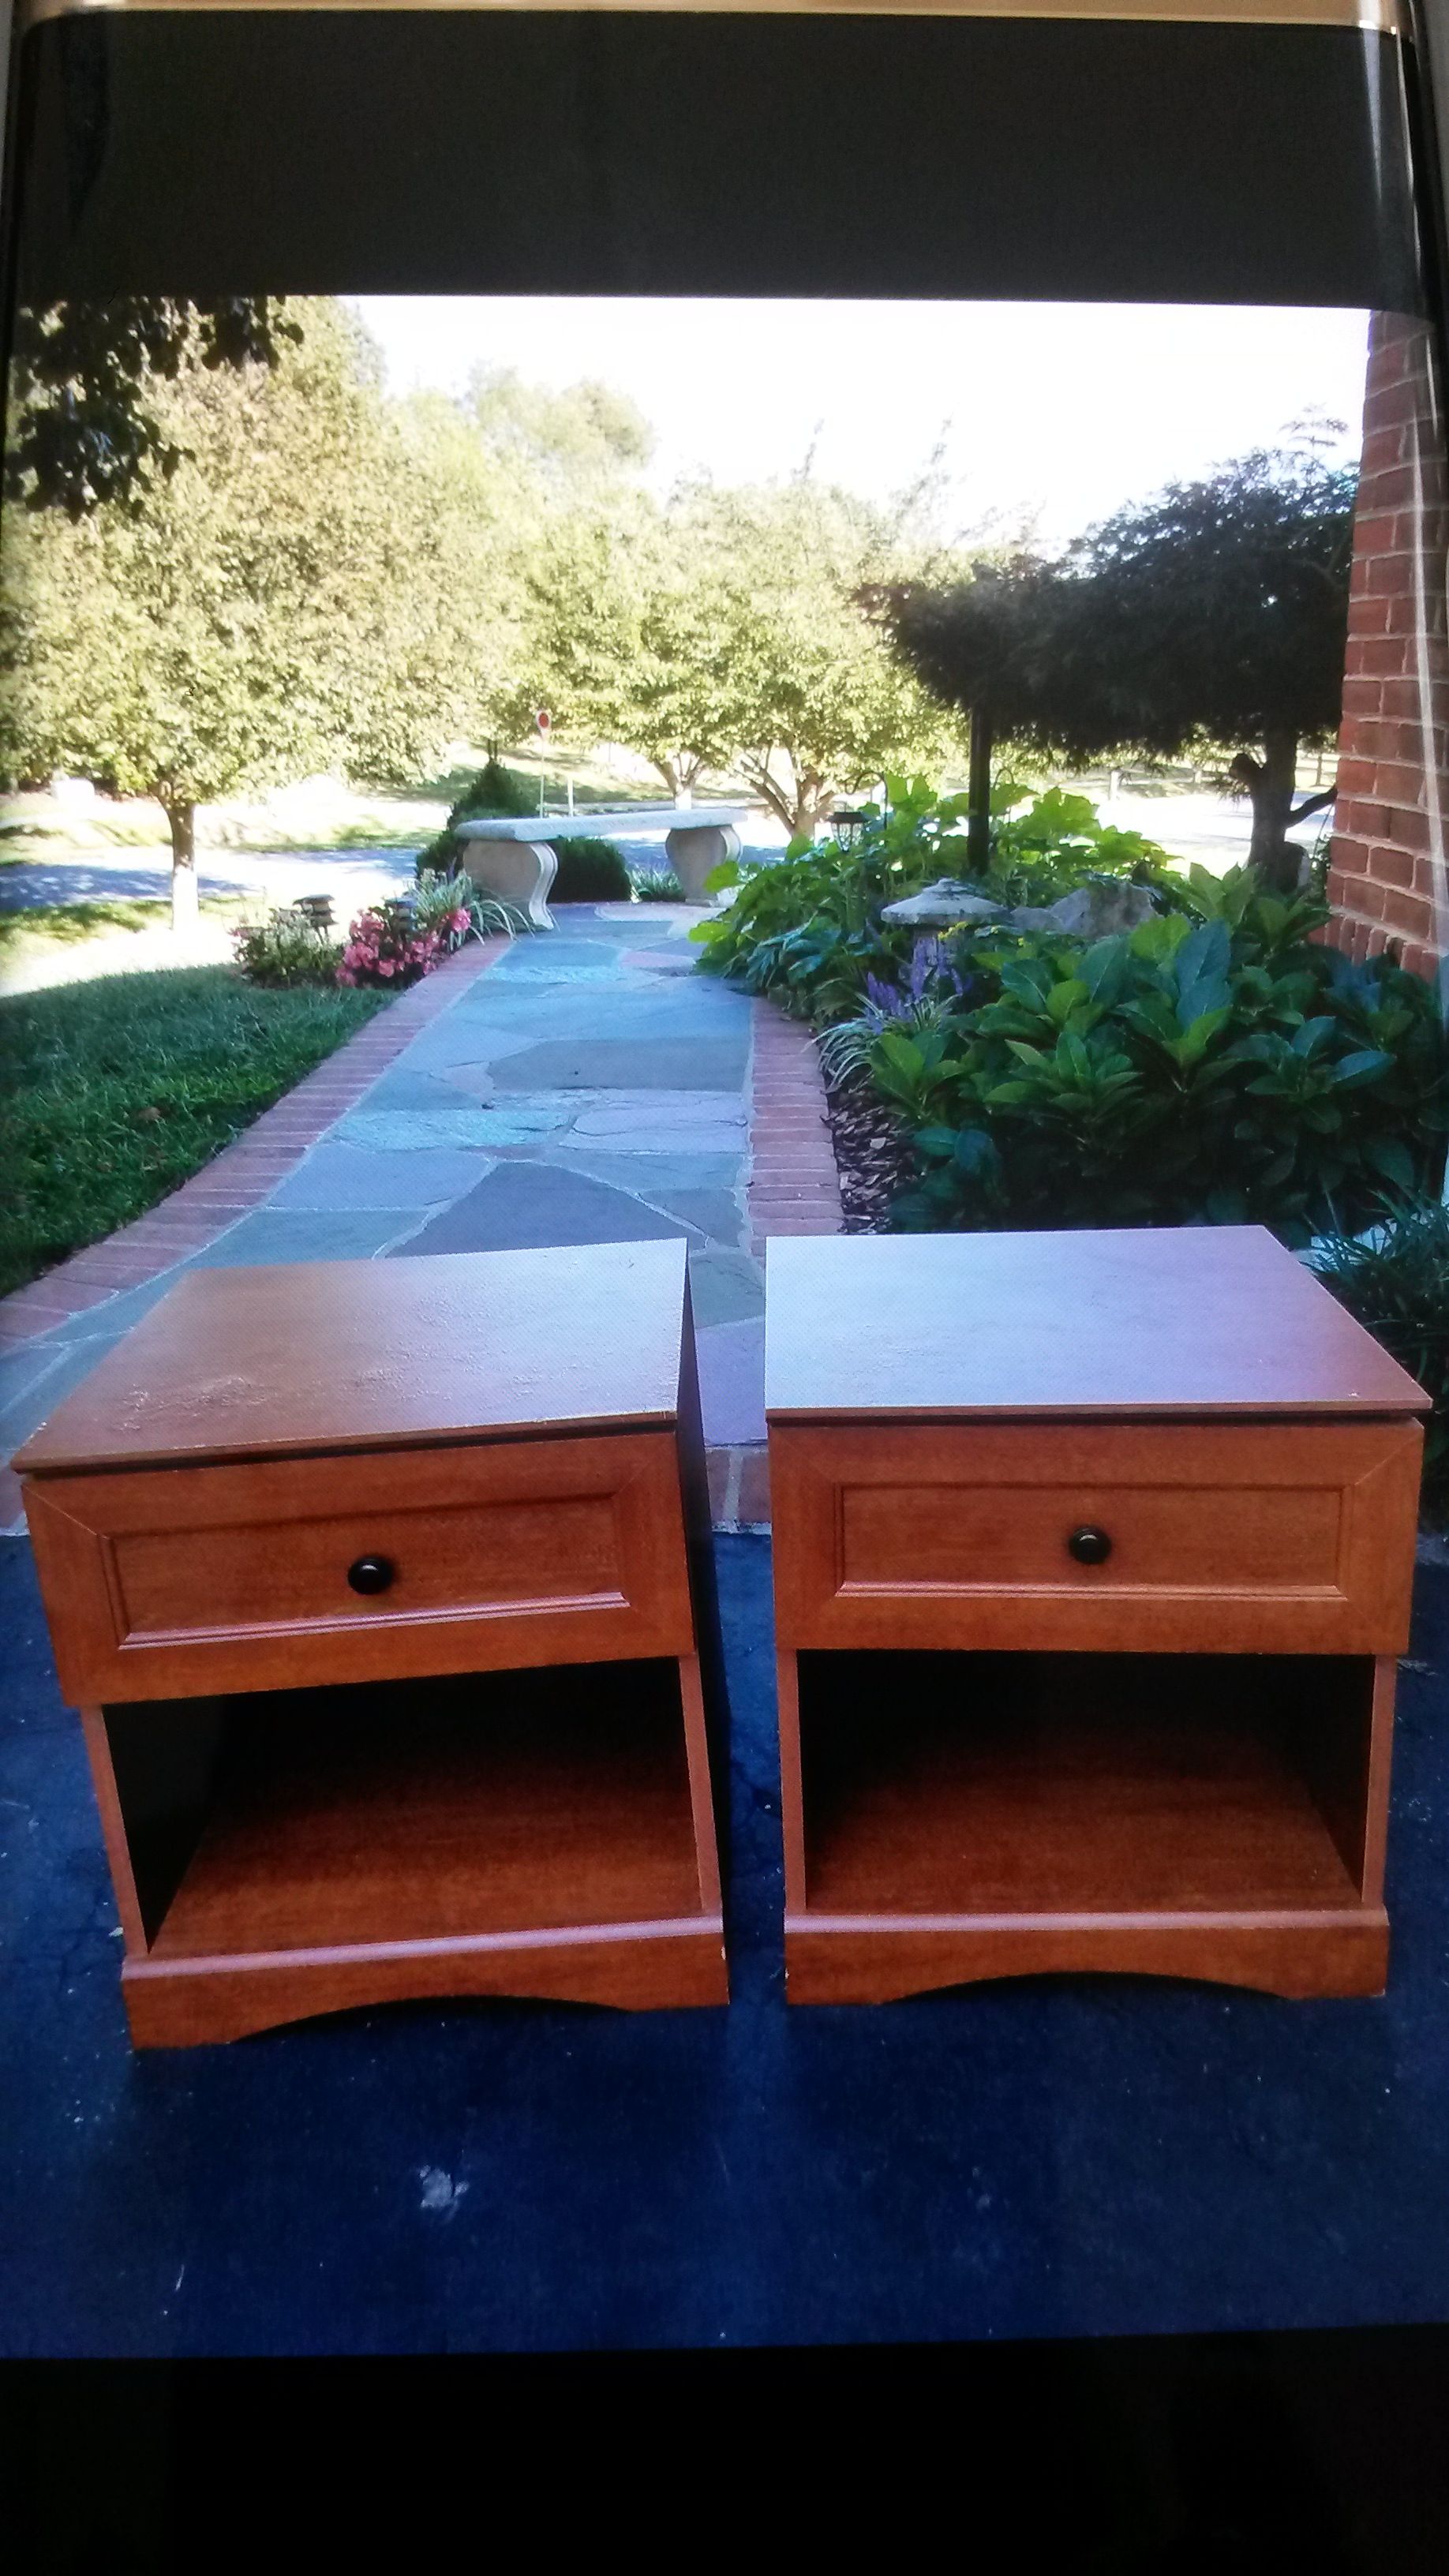 2 cherry wood end tables or night stands